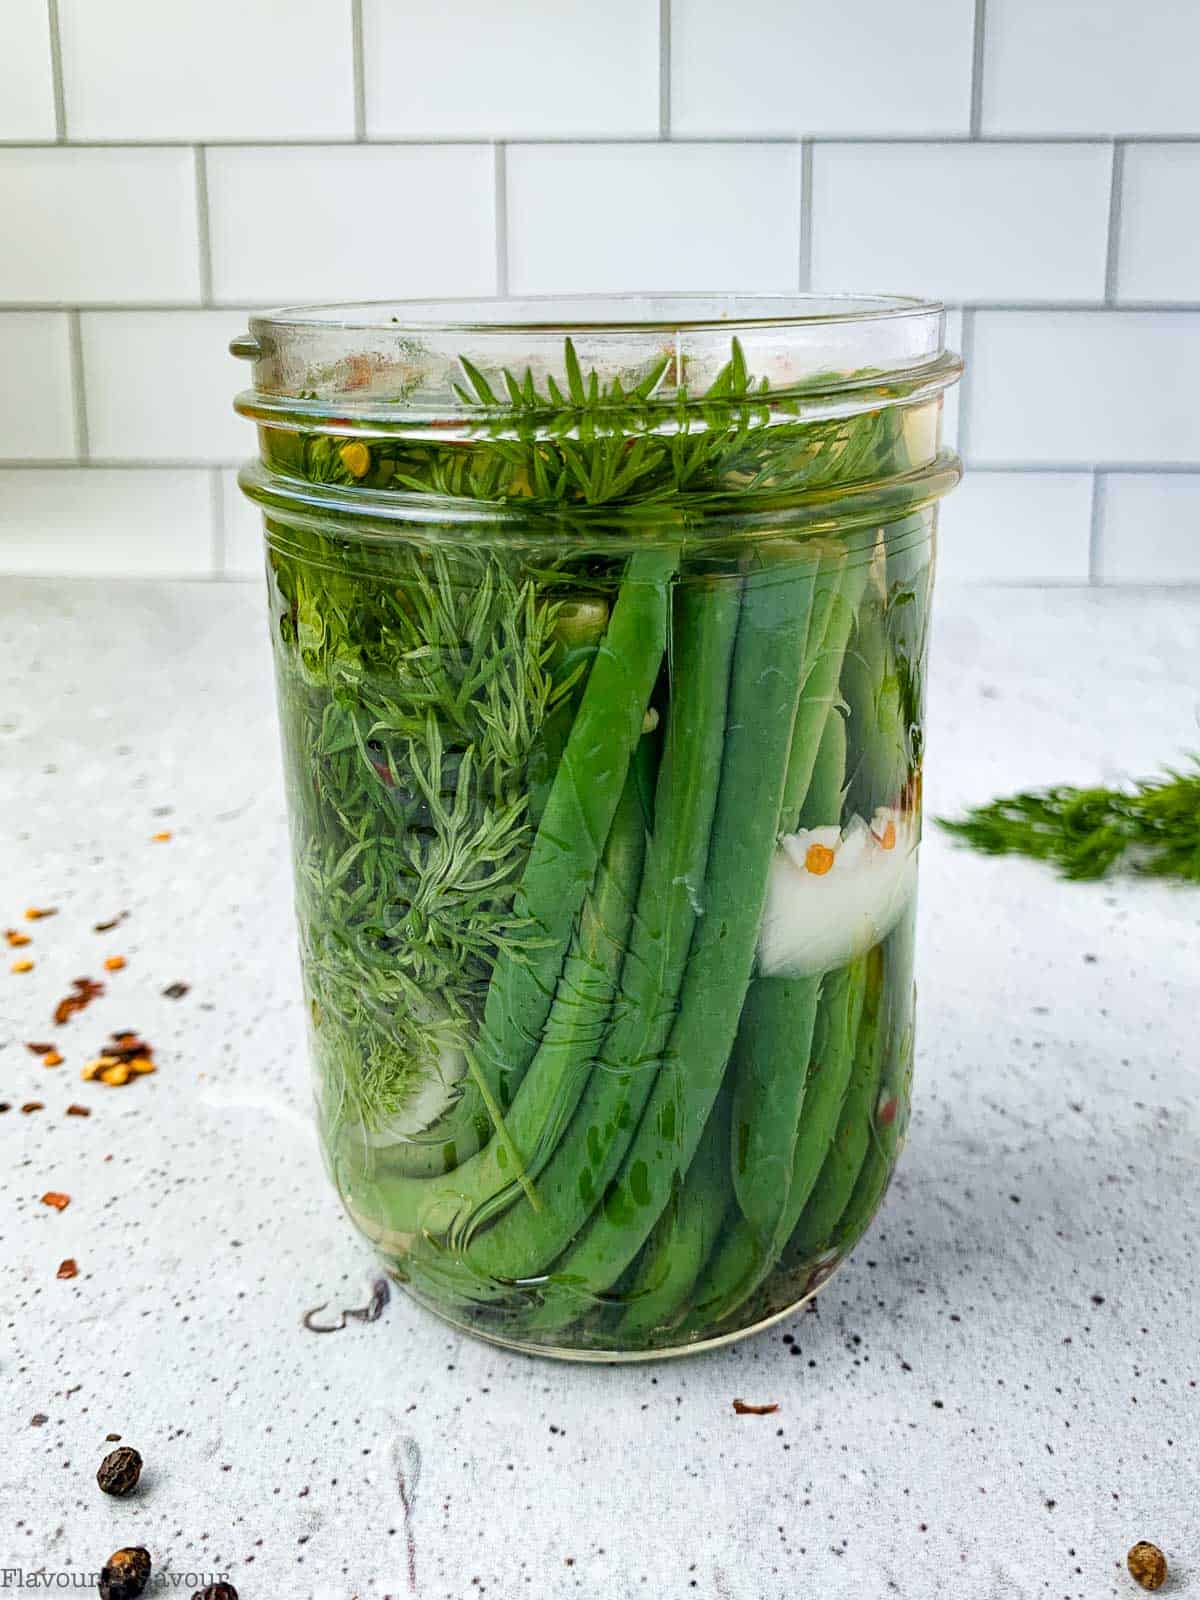 Adding pickling brine to a jar of green beans.